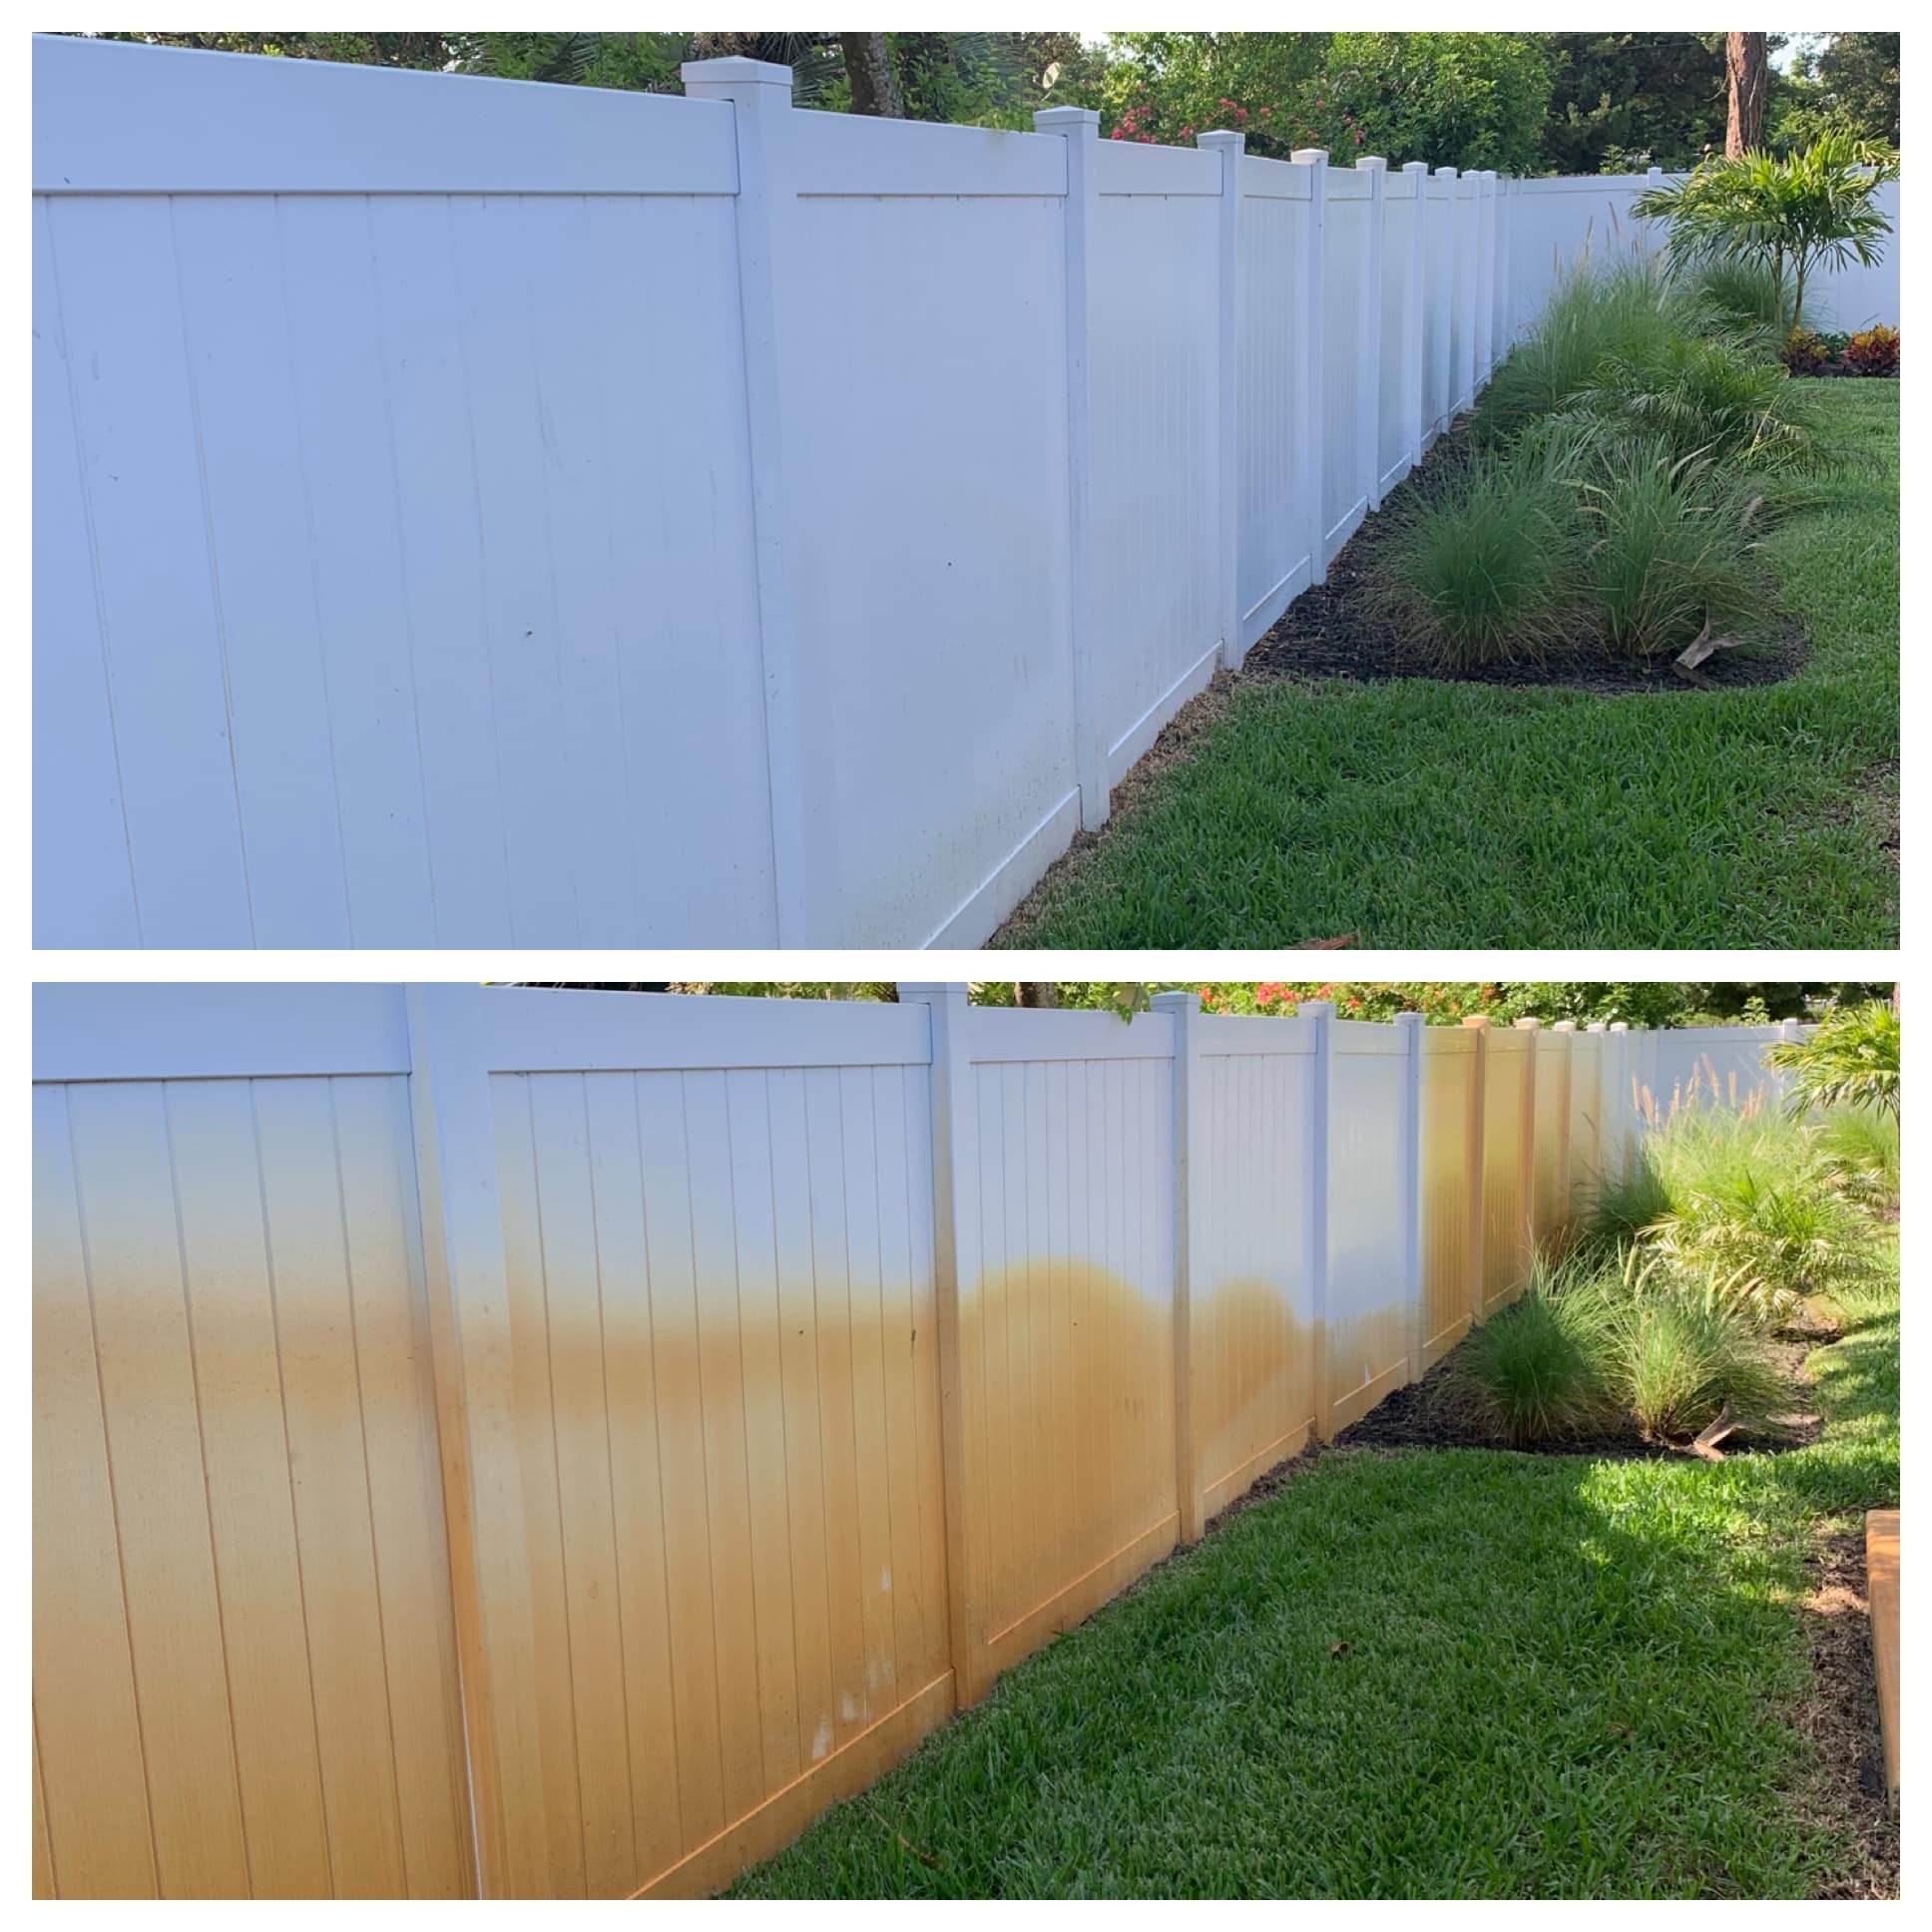 PVC and Wood Deck / Fence Cleaning for Cape Coast Pressure Cleaning & Soft Washing in Florida Central East Coast, 